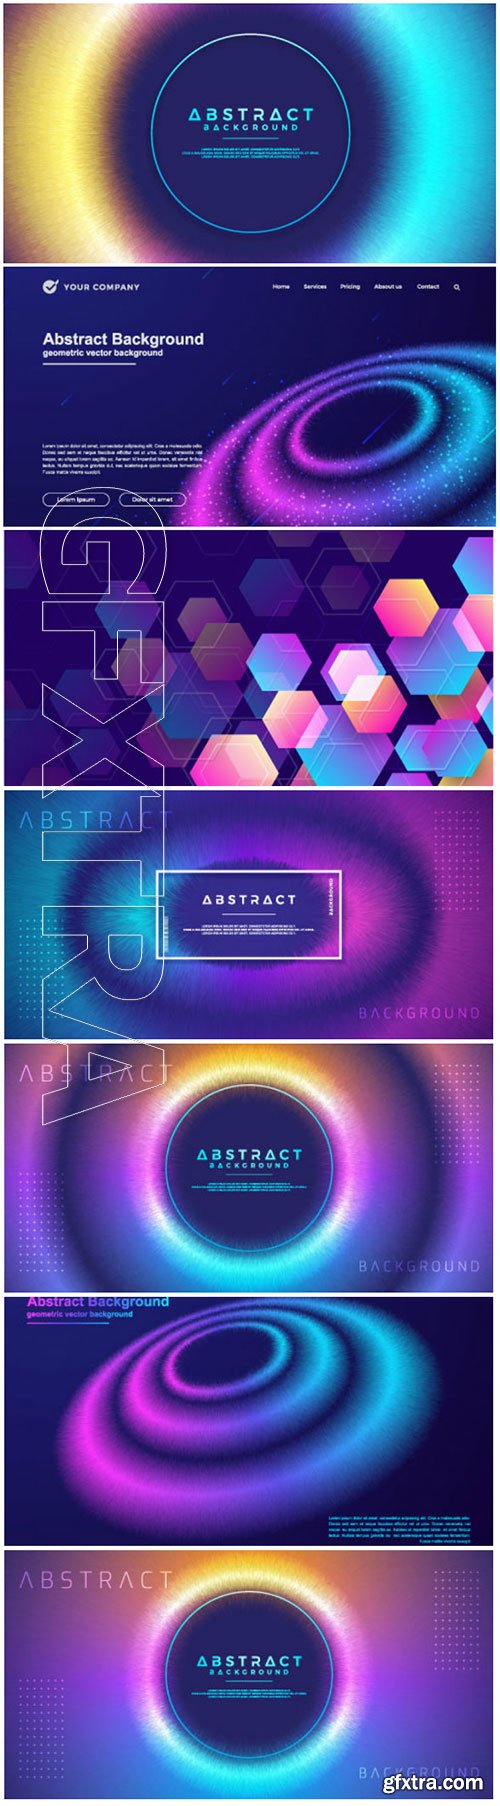 Abstract, dynamic, modern circle background